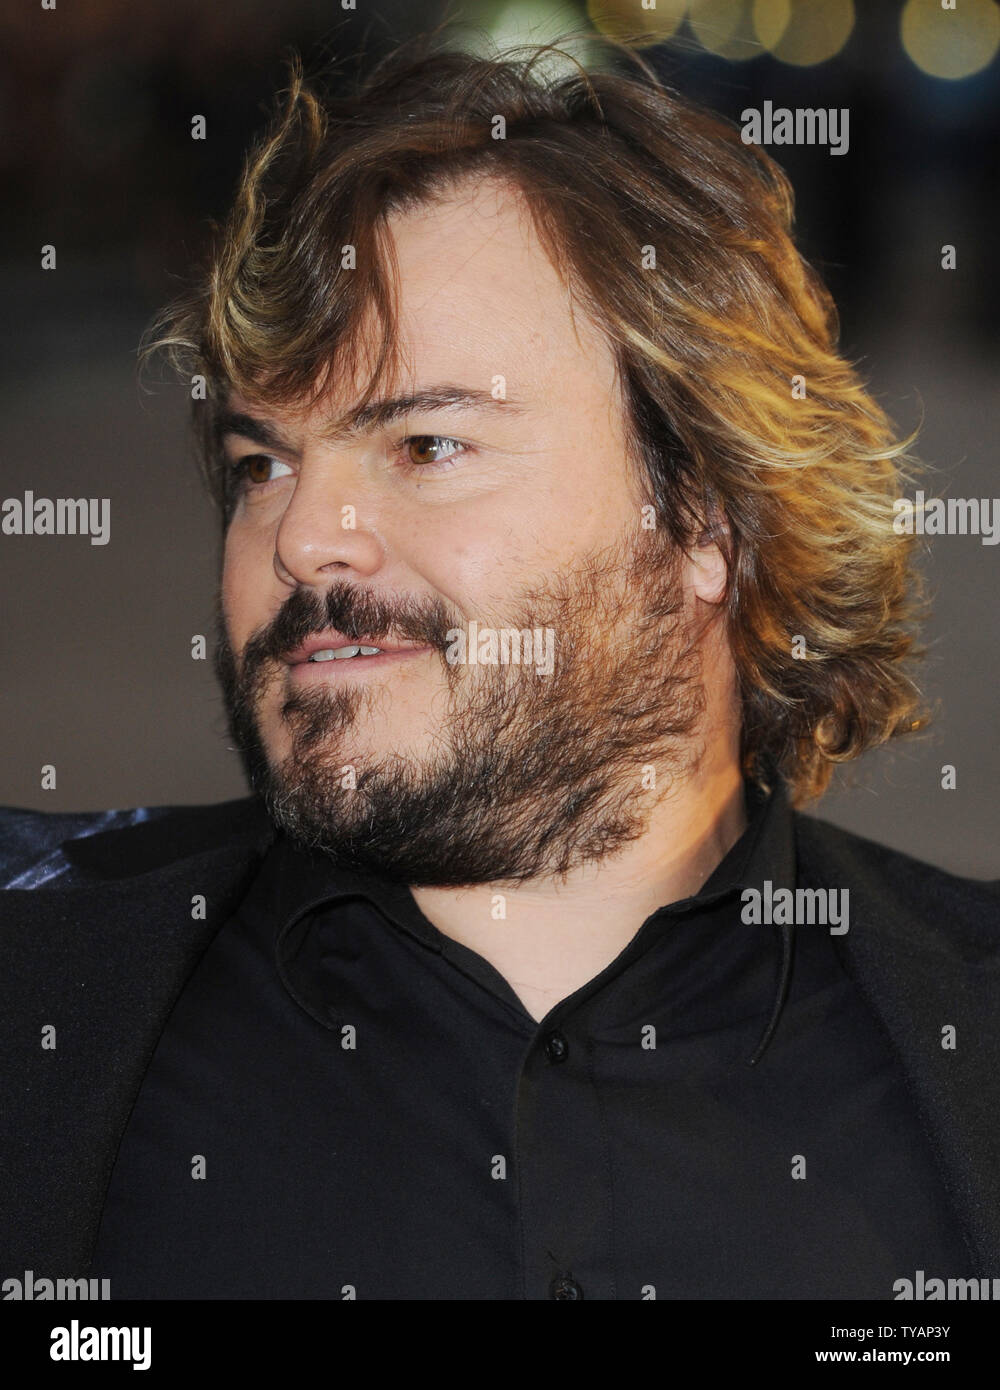 American actor Jack Black attends the premiere of 'Tropic Thunder' at Odeon, Leicester Square in London on September 16, 2008.  (UPI Photo/Rune Hellestad) Stock Photo